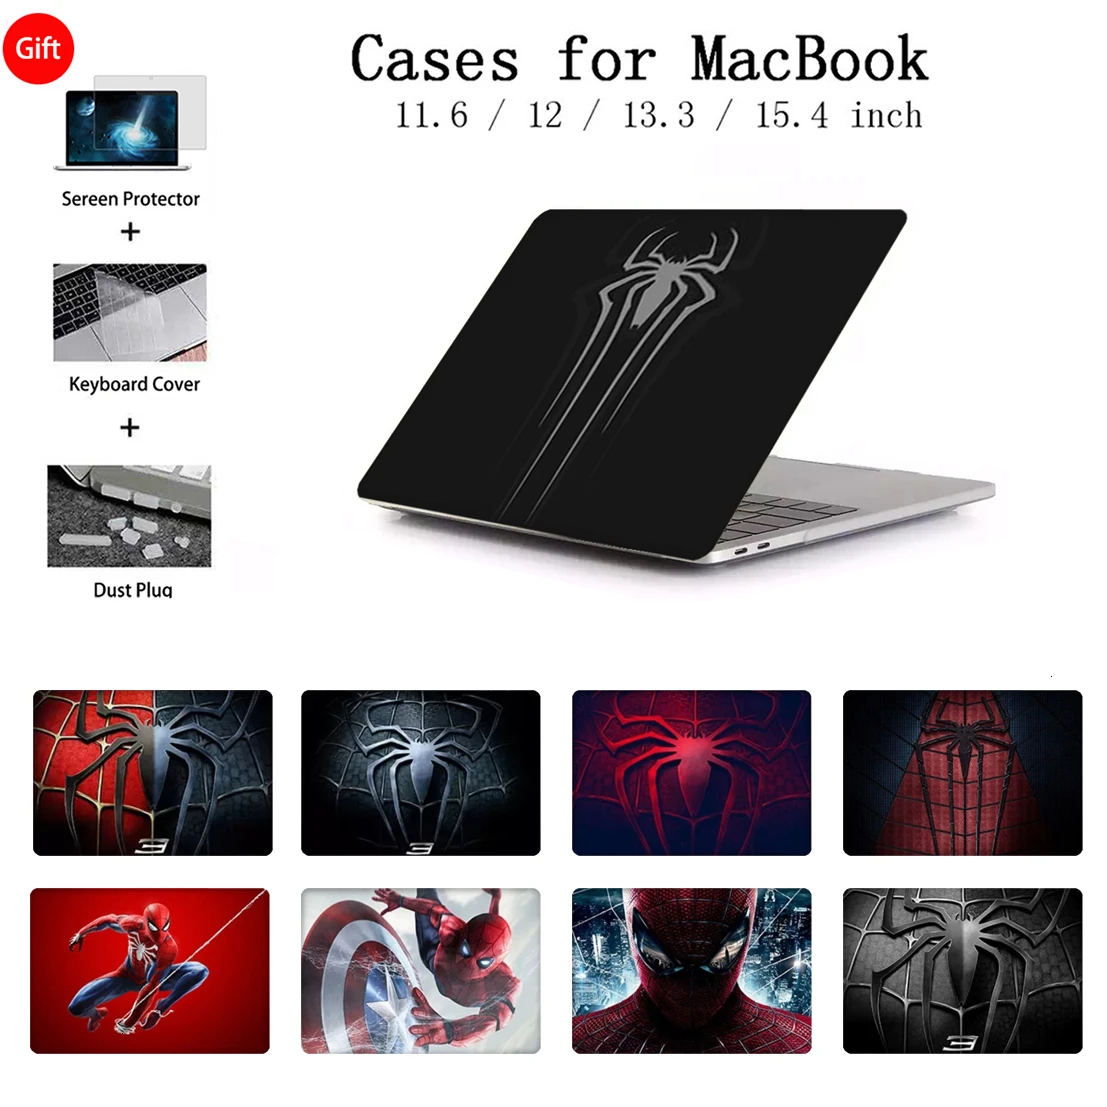 

2019 Spider Laptop Case For Apple Macbook Air Pro Retina 11 12 13 15 For Mac Book 13.3 Inch With Touch Bar Keyboard Cover A2159